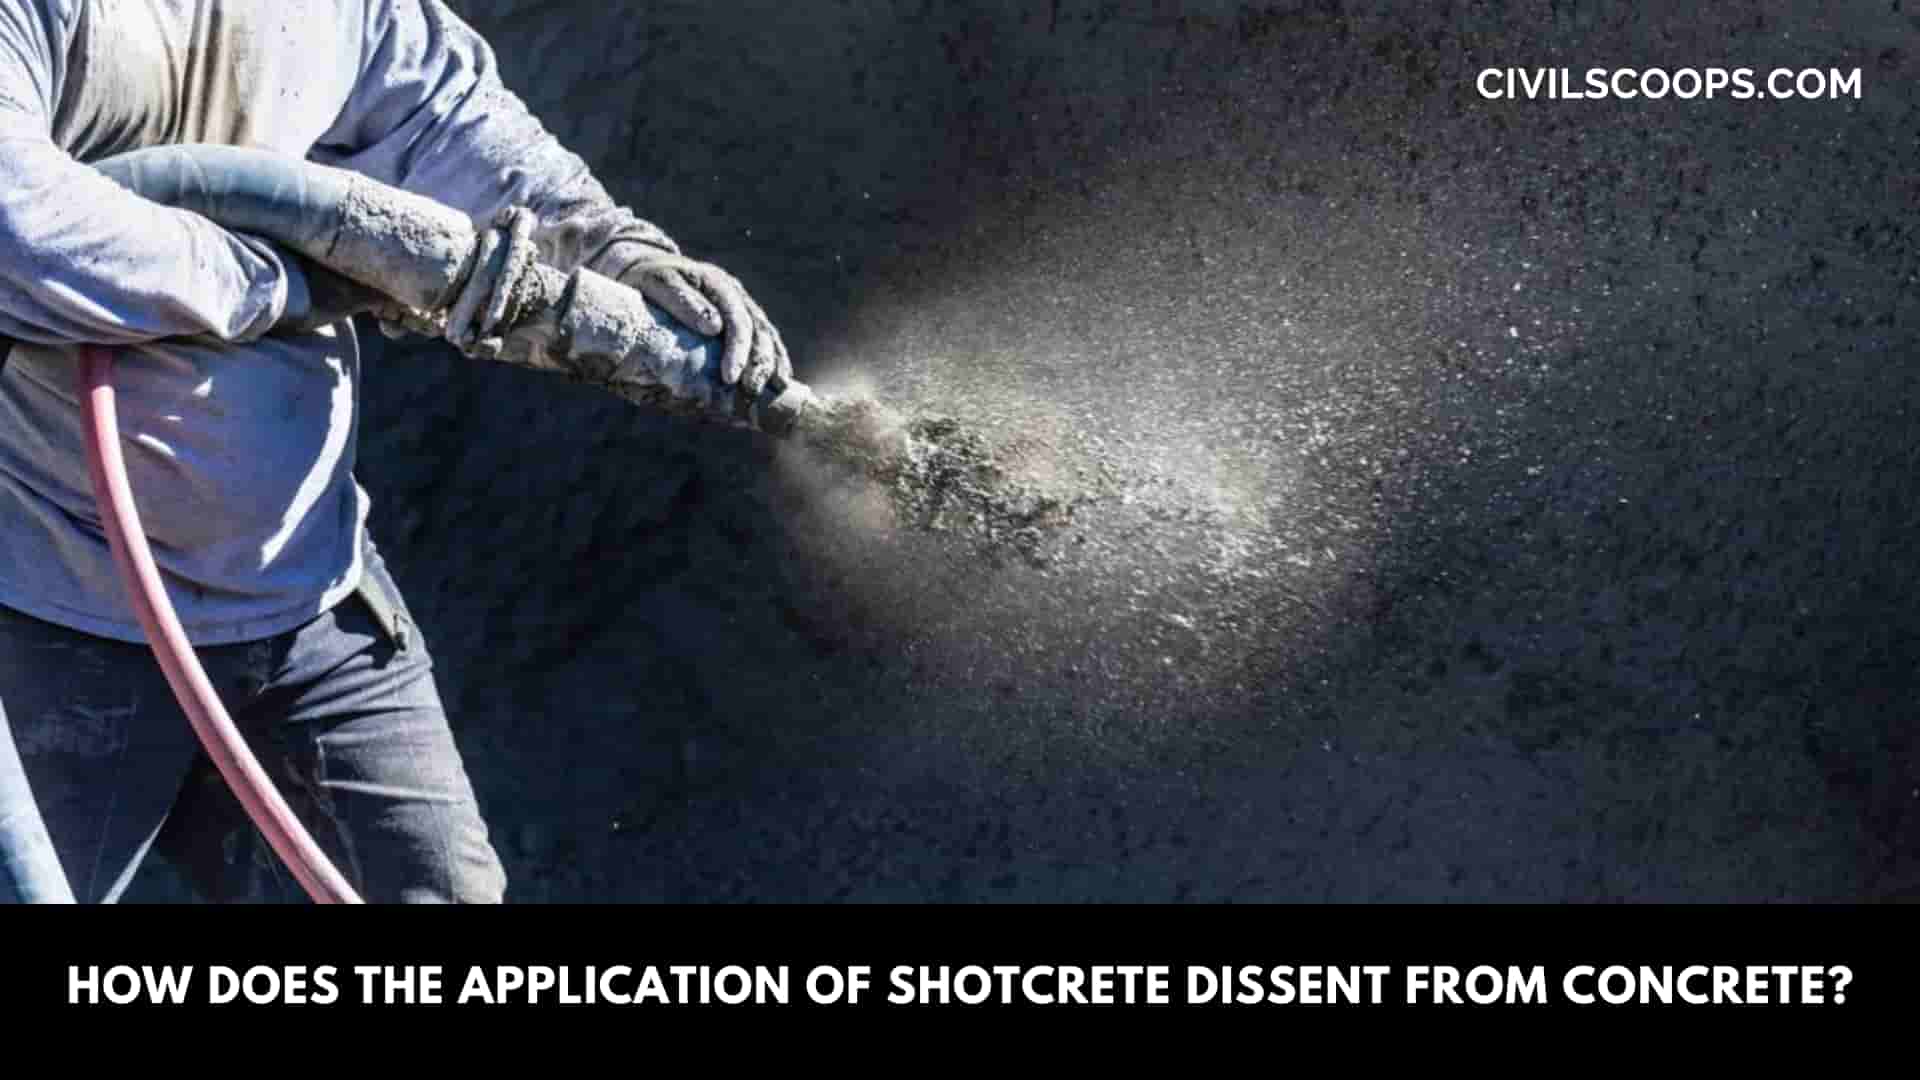 How Does the Application of Shotcrete Dissent from Concrete?